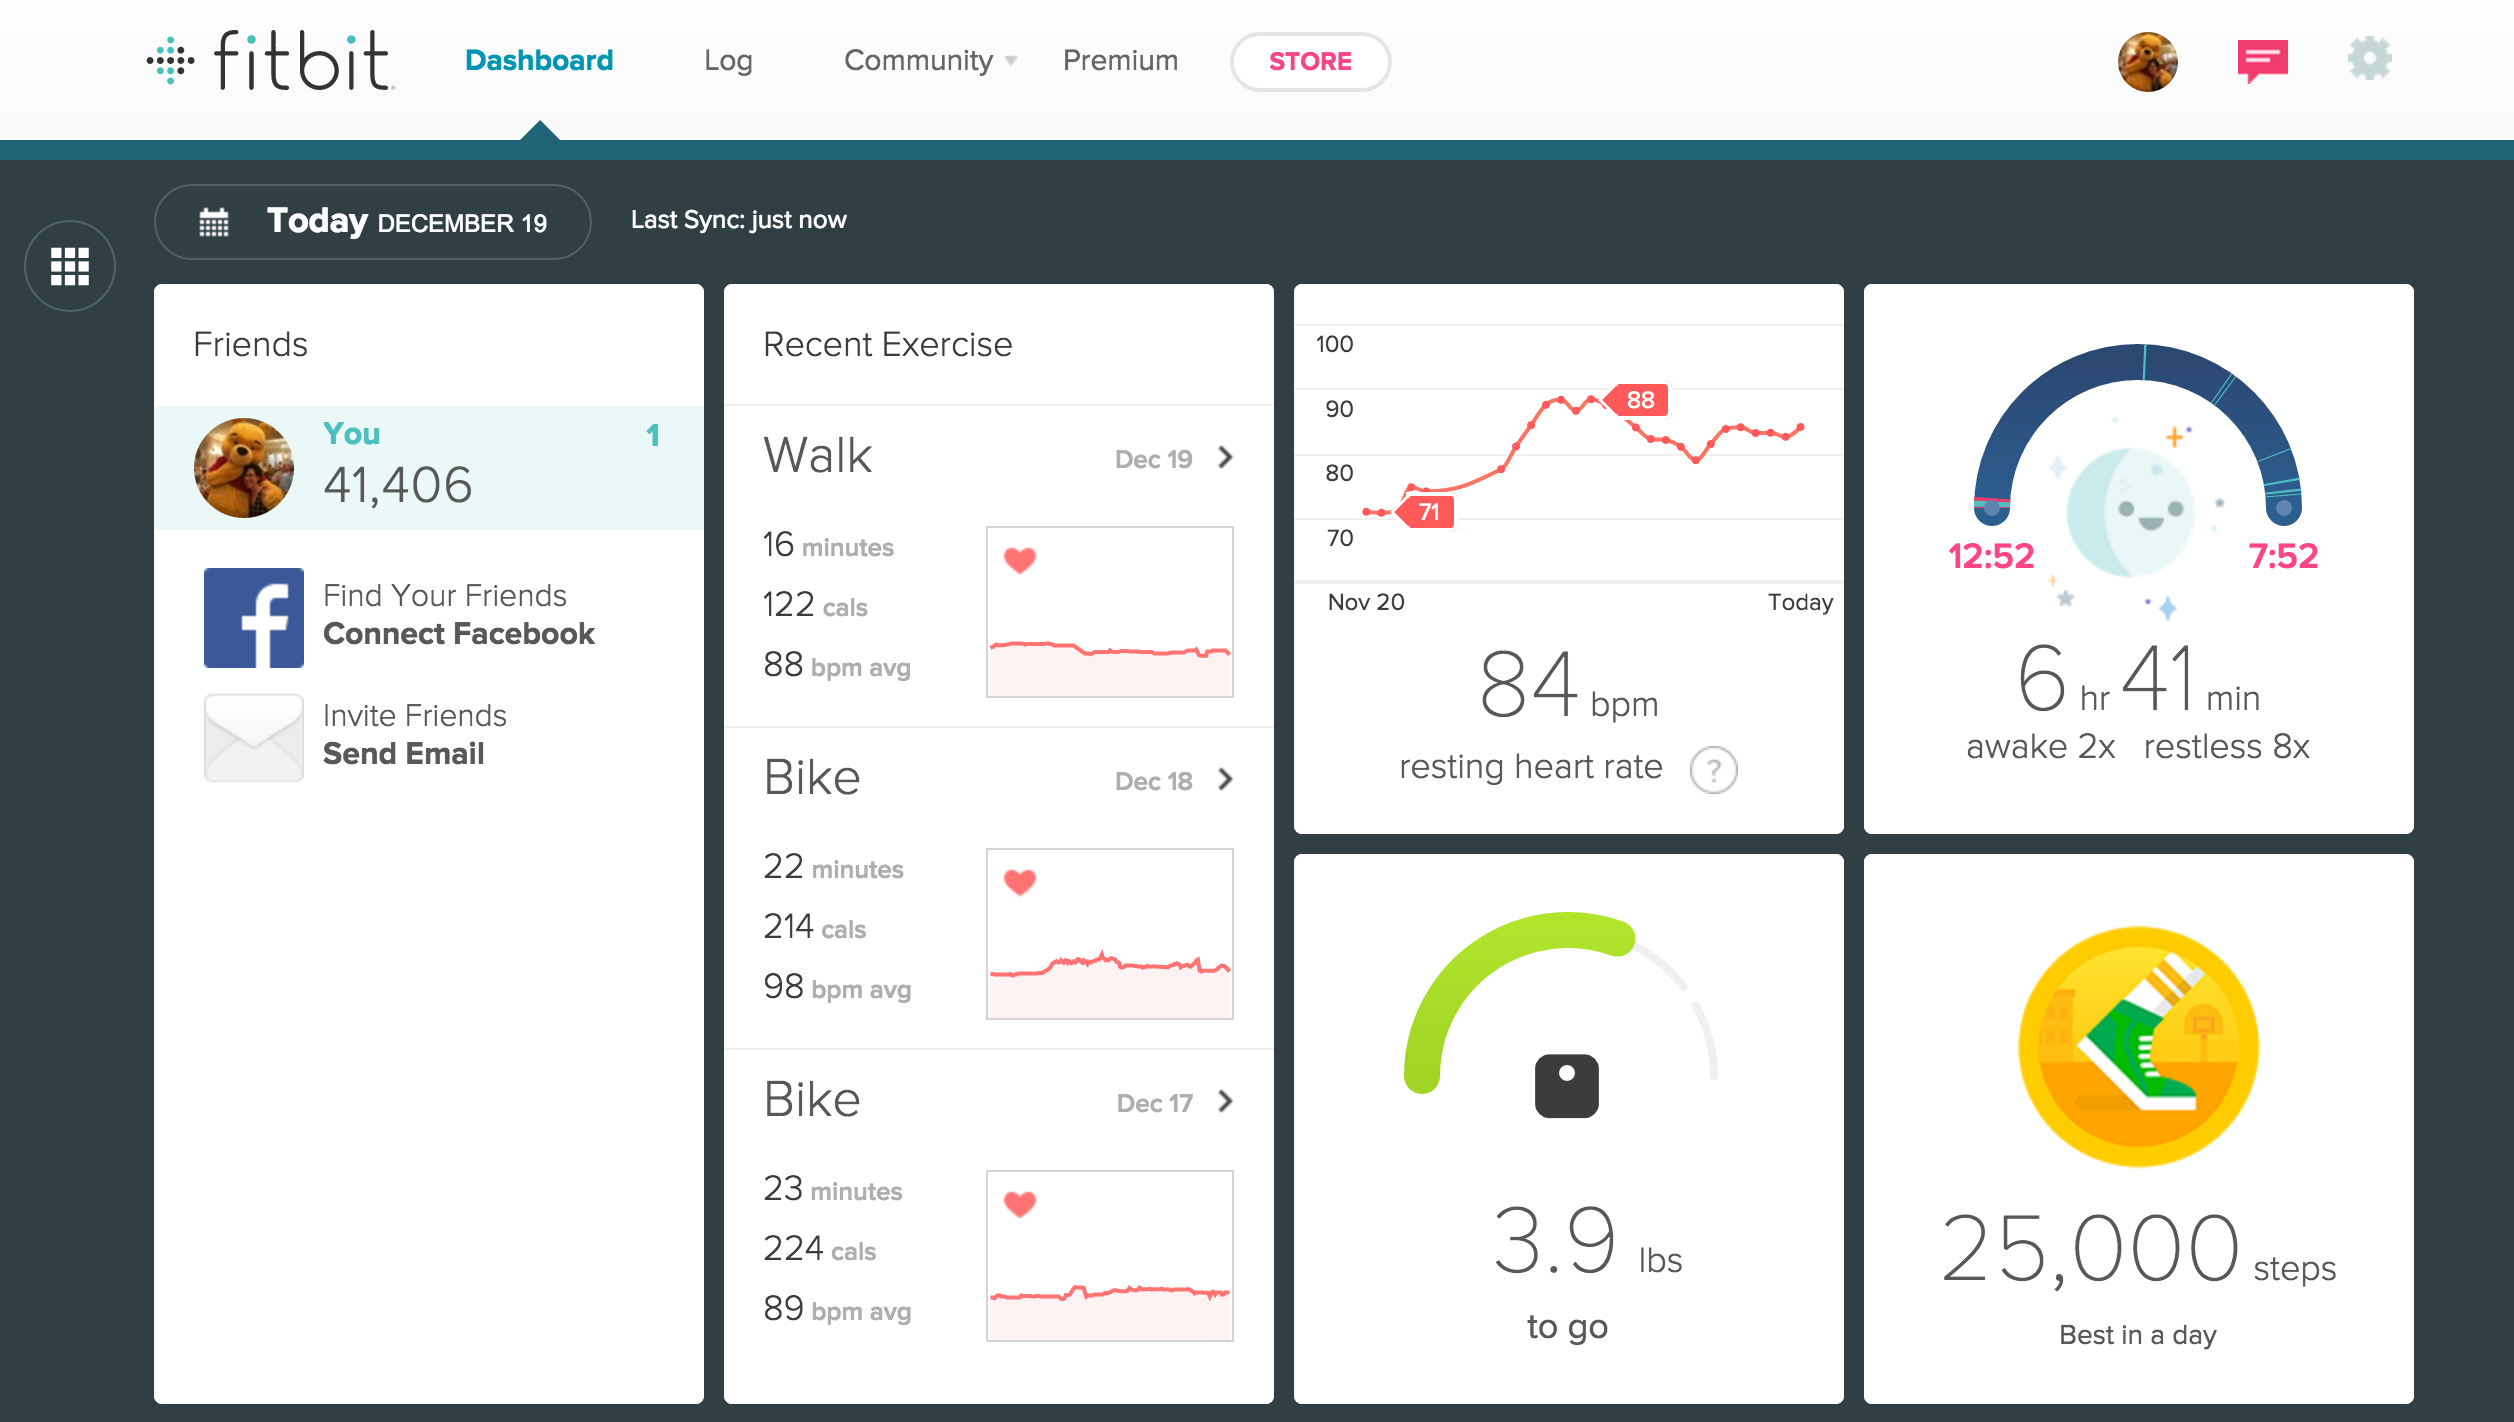 Fitness Tools that Track Your Exercise, Meals, Sleep, and